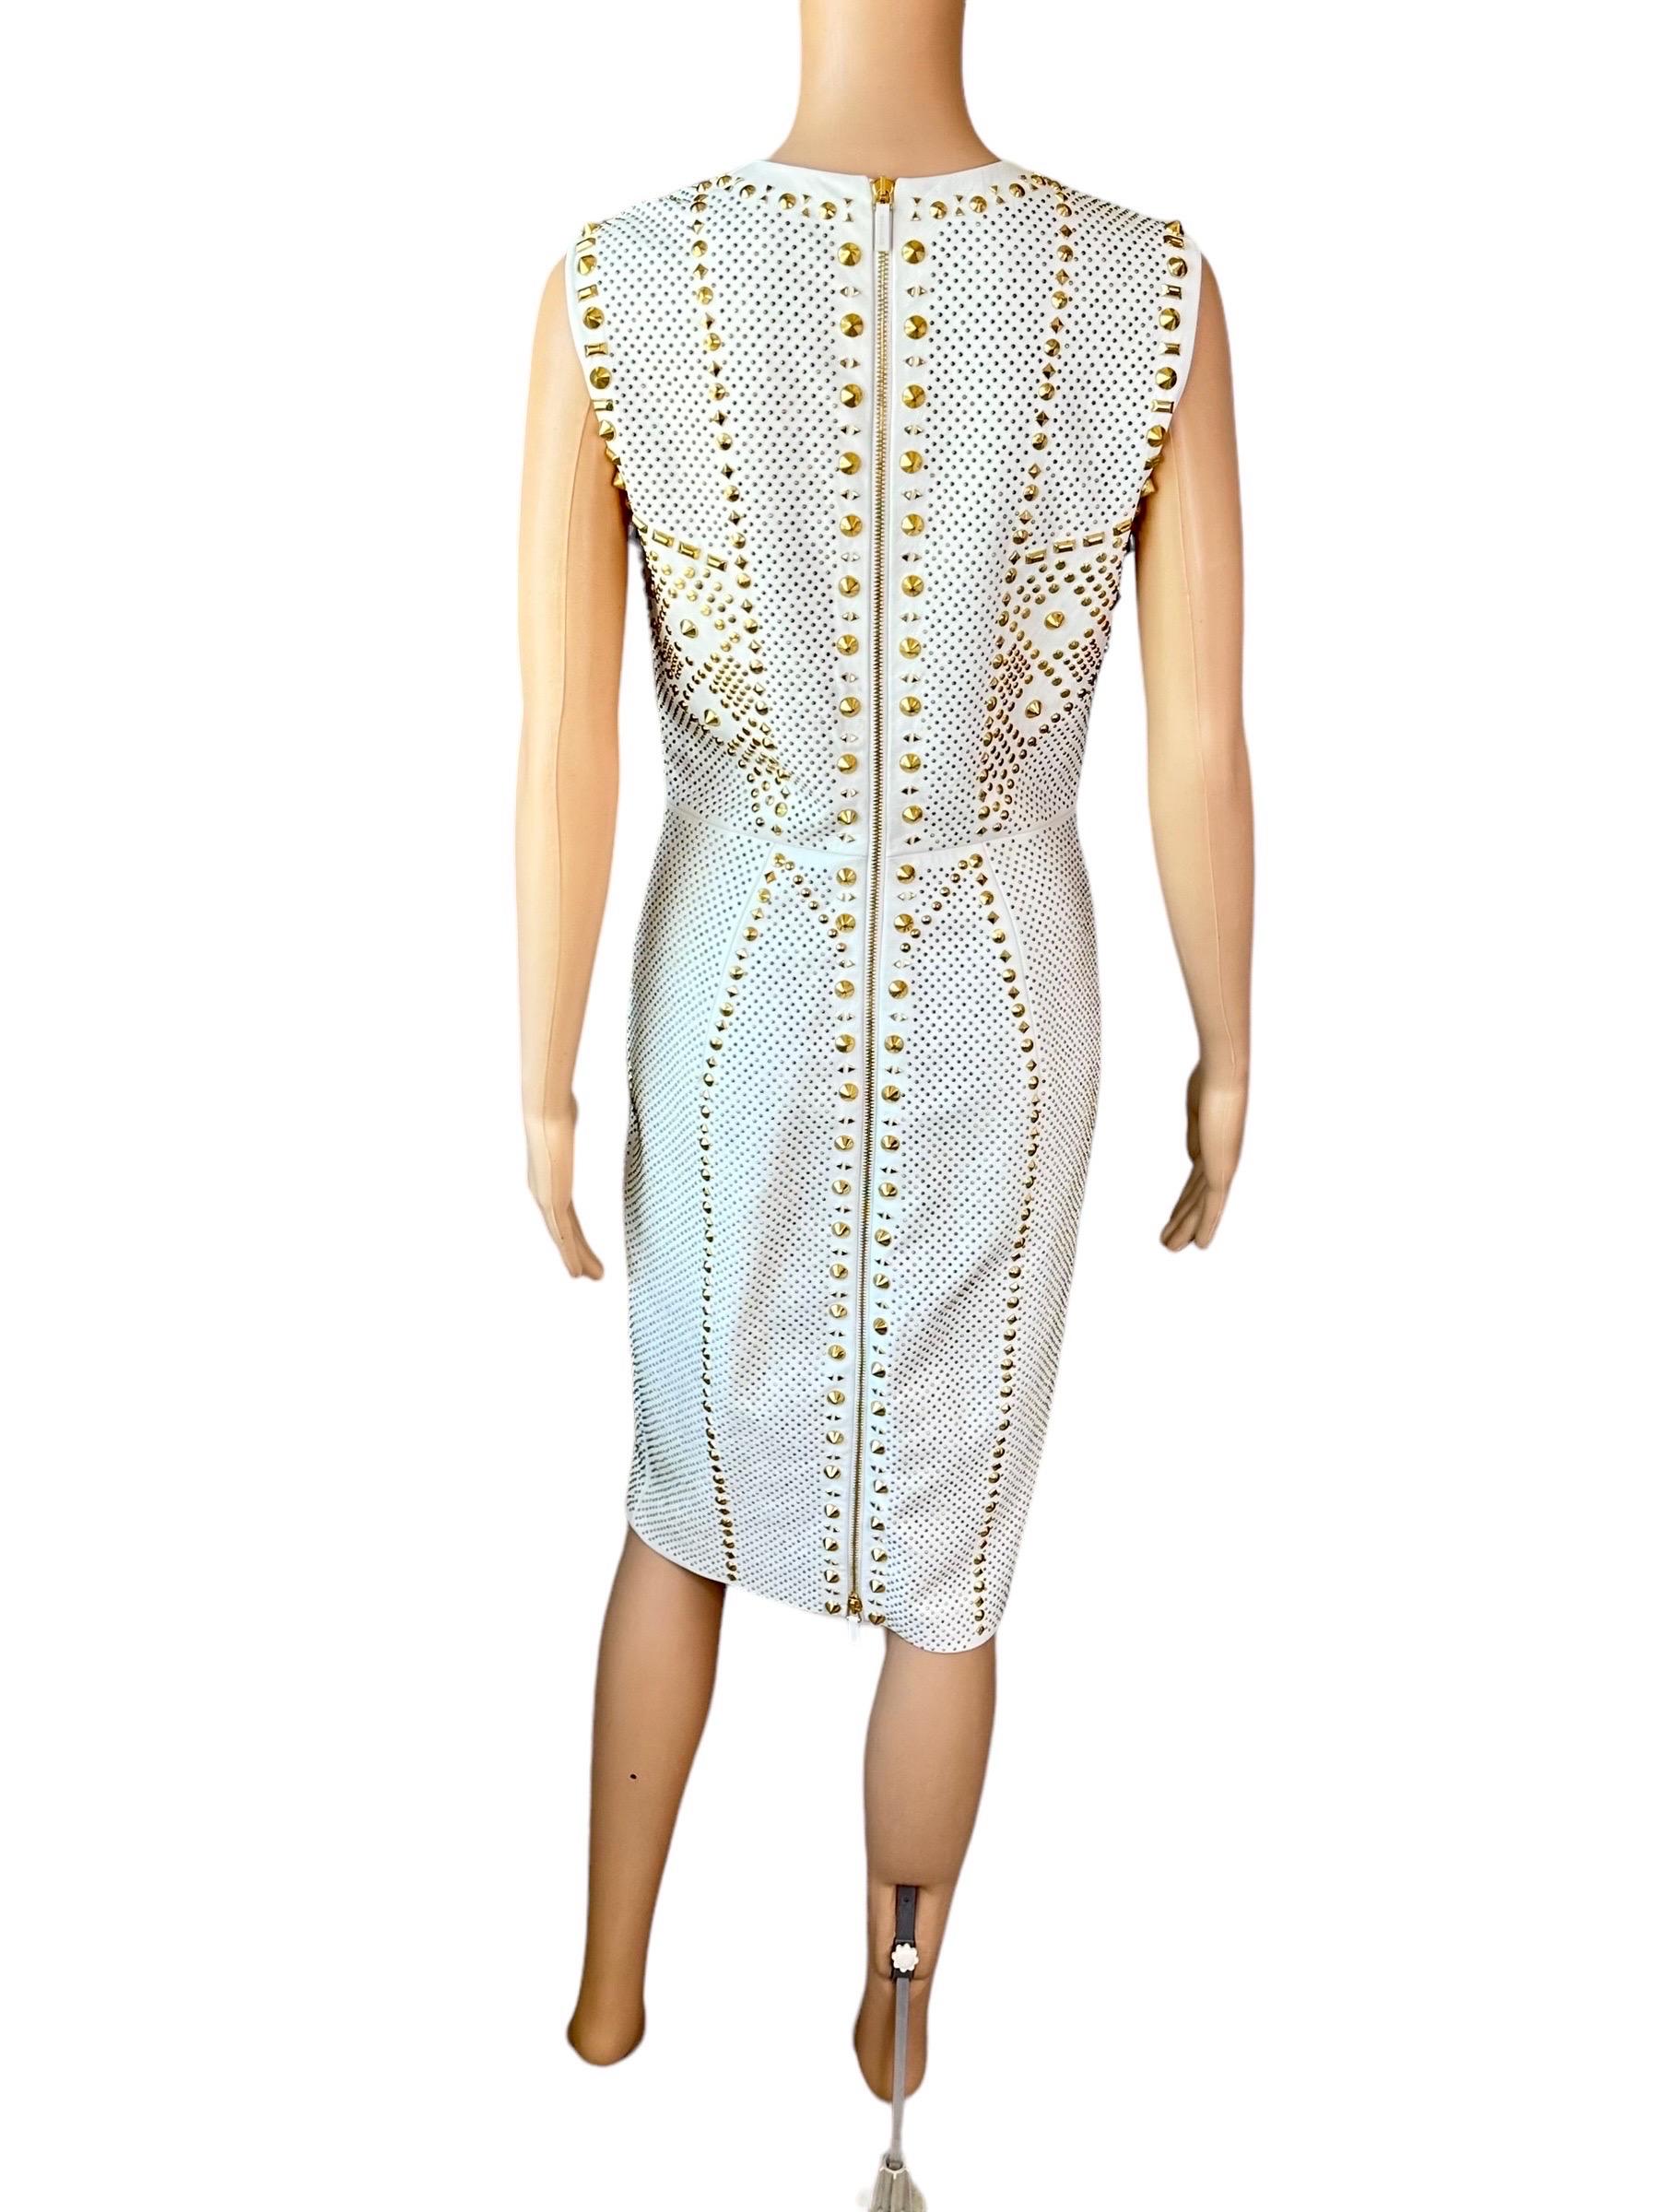 Versace S/S 2012 Runway Embellished Gold Studded Ivory Leather Dress  For Sale 4